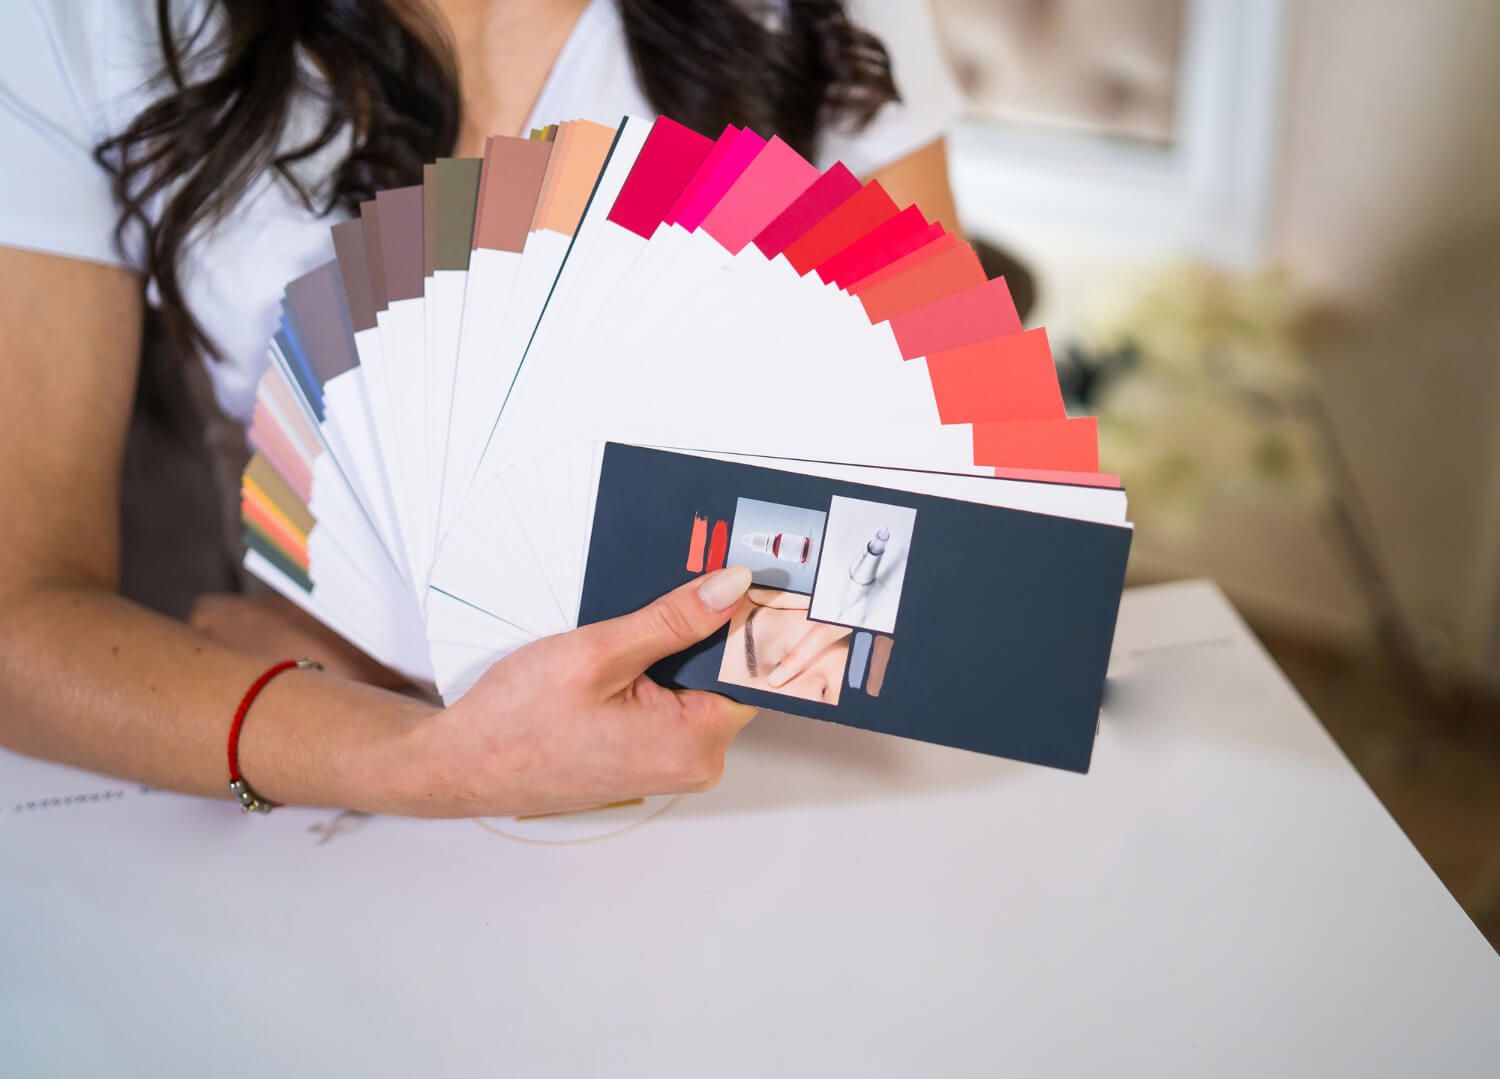 Choosing paper material and number of copies for printing Instagram photos